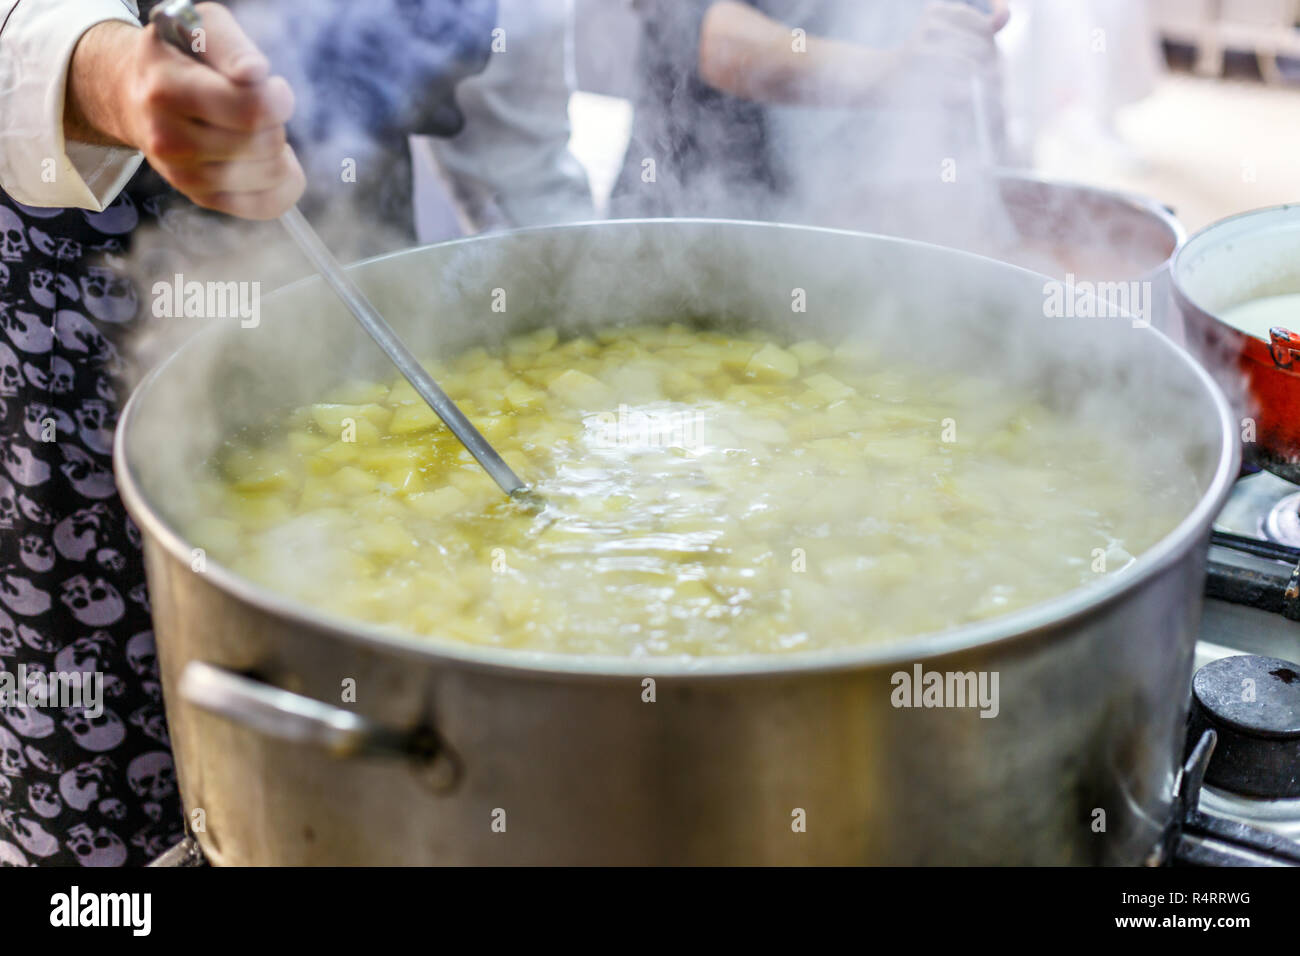 https://c8.alamy.com/comp/R4RRWG/chef-is-cooking-soup-R4RRWG.jpg